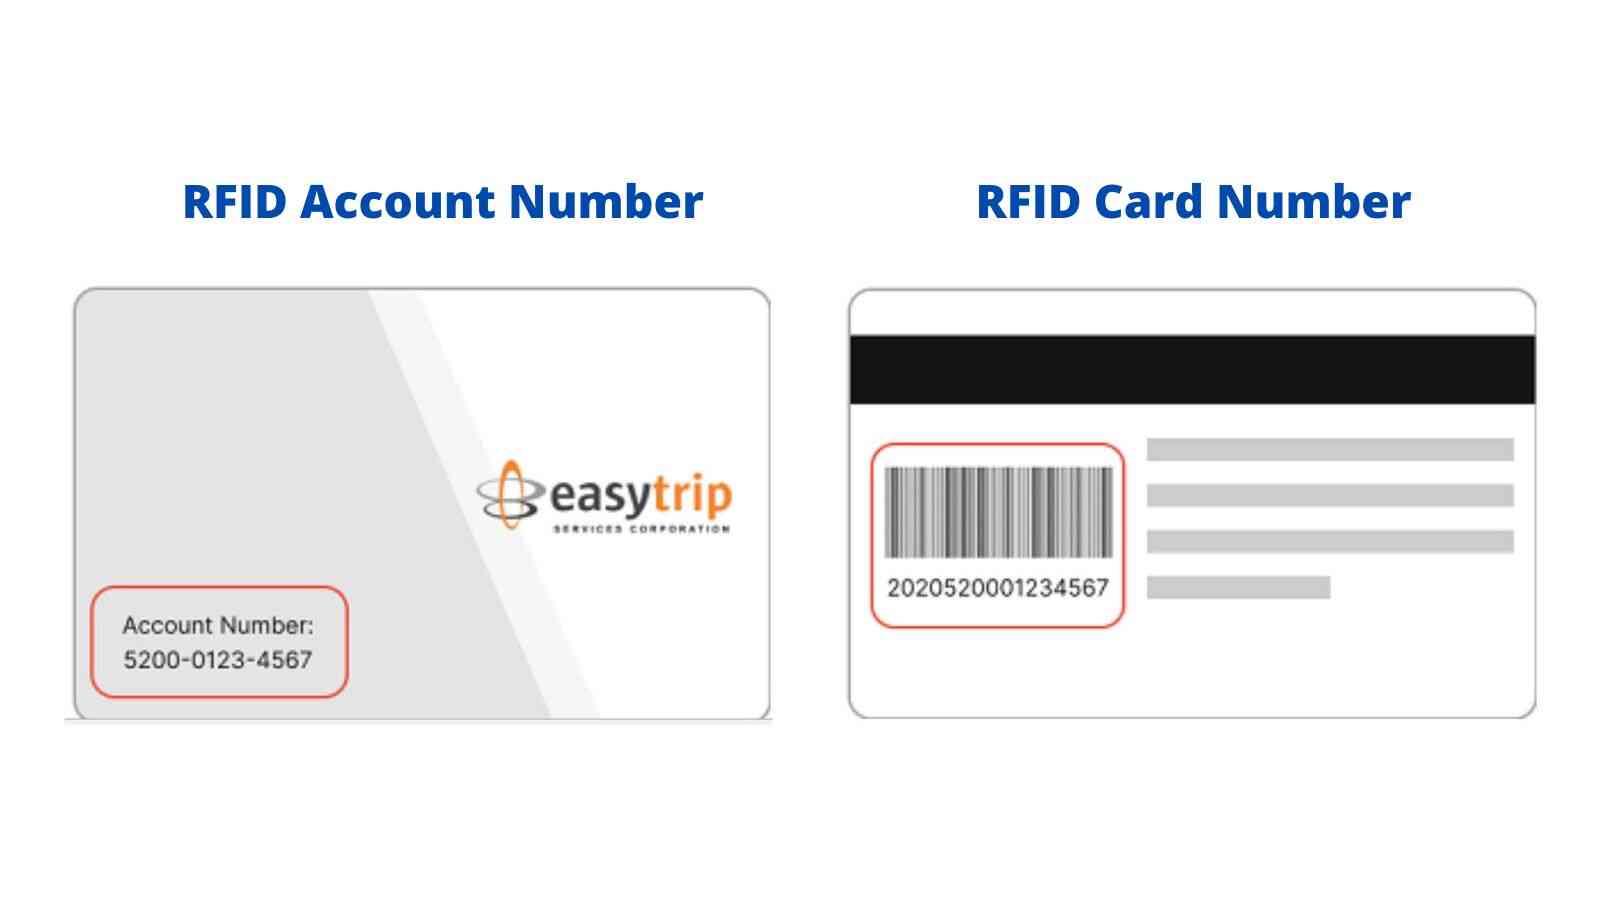 easytrip account number and card number